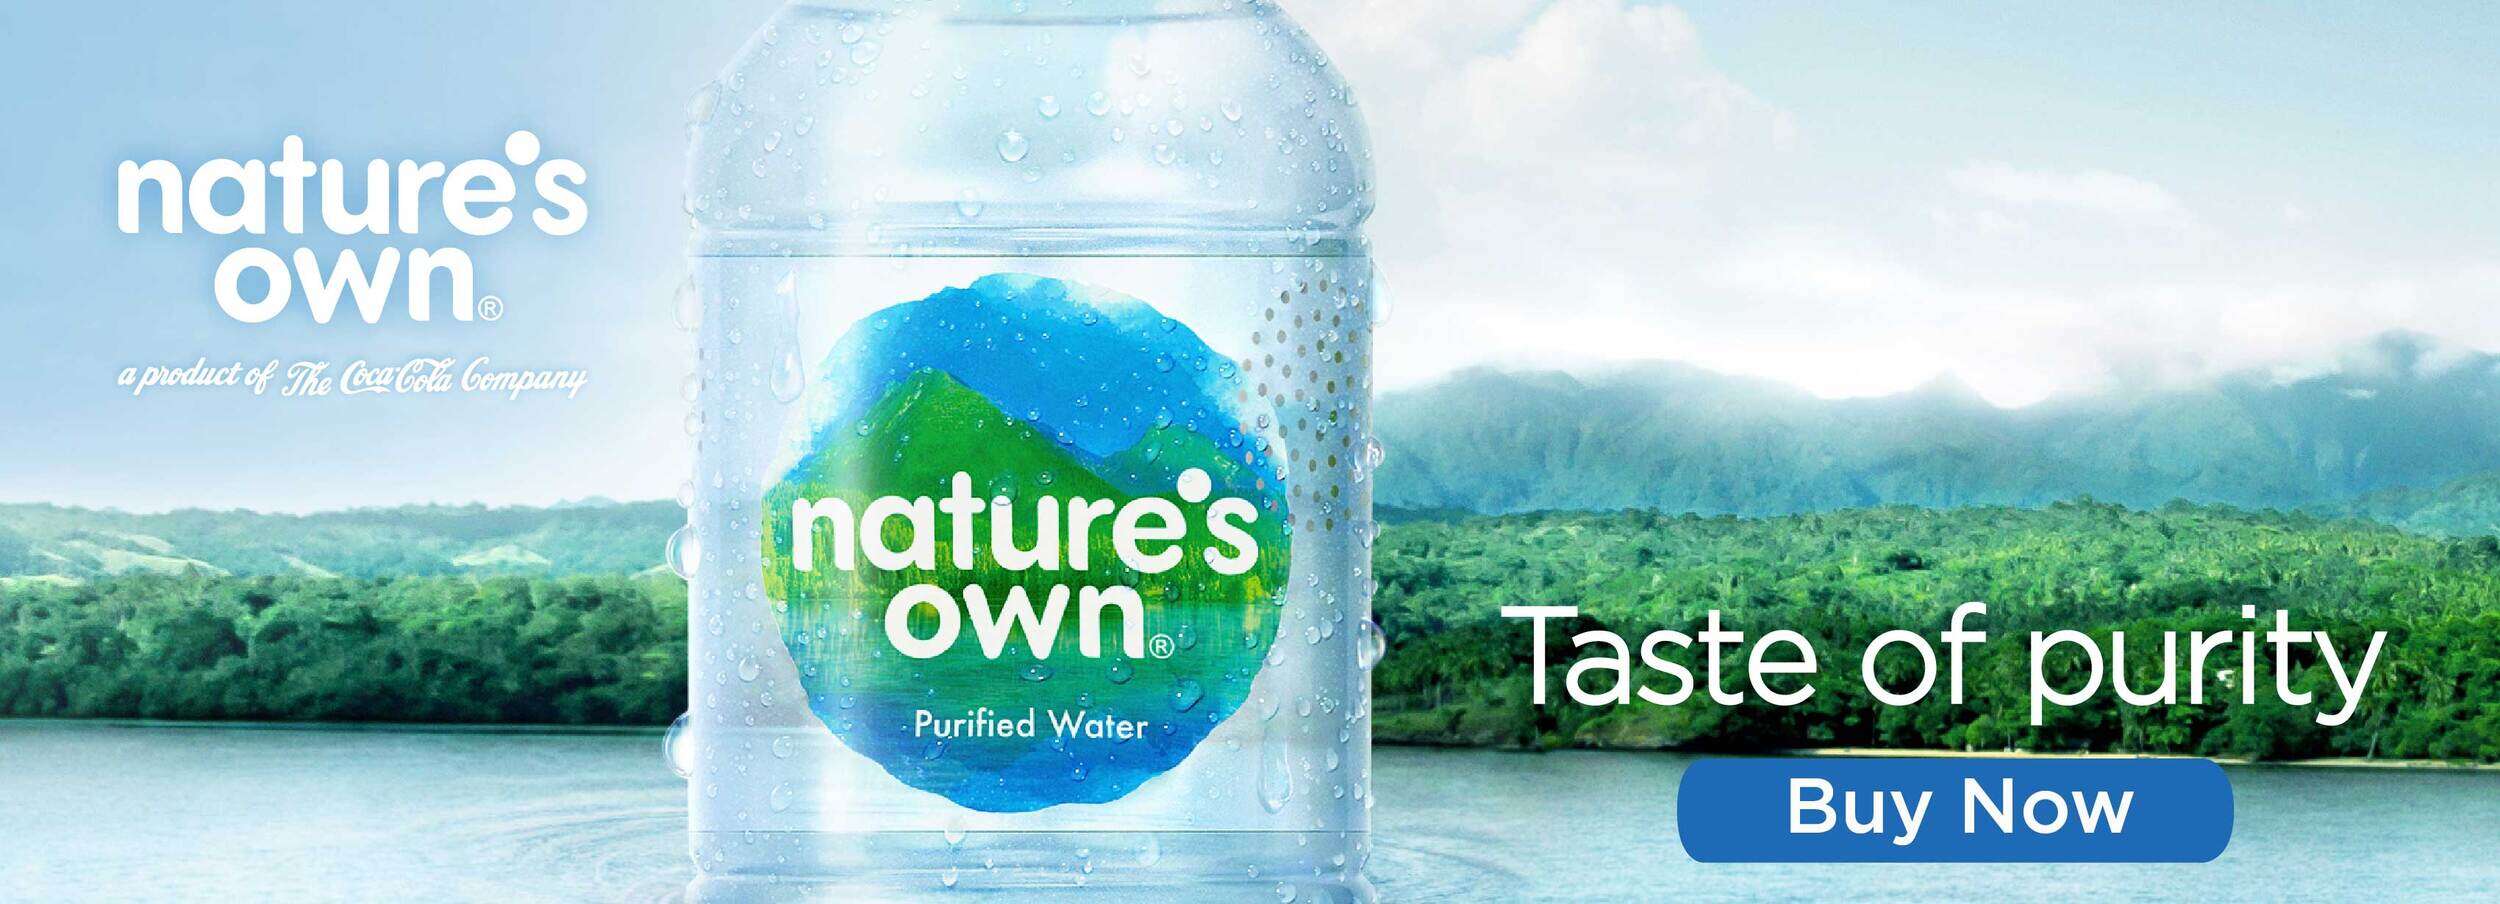 Natures Own Banner